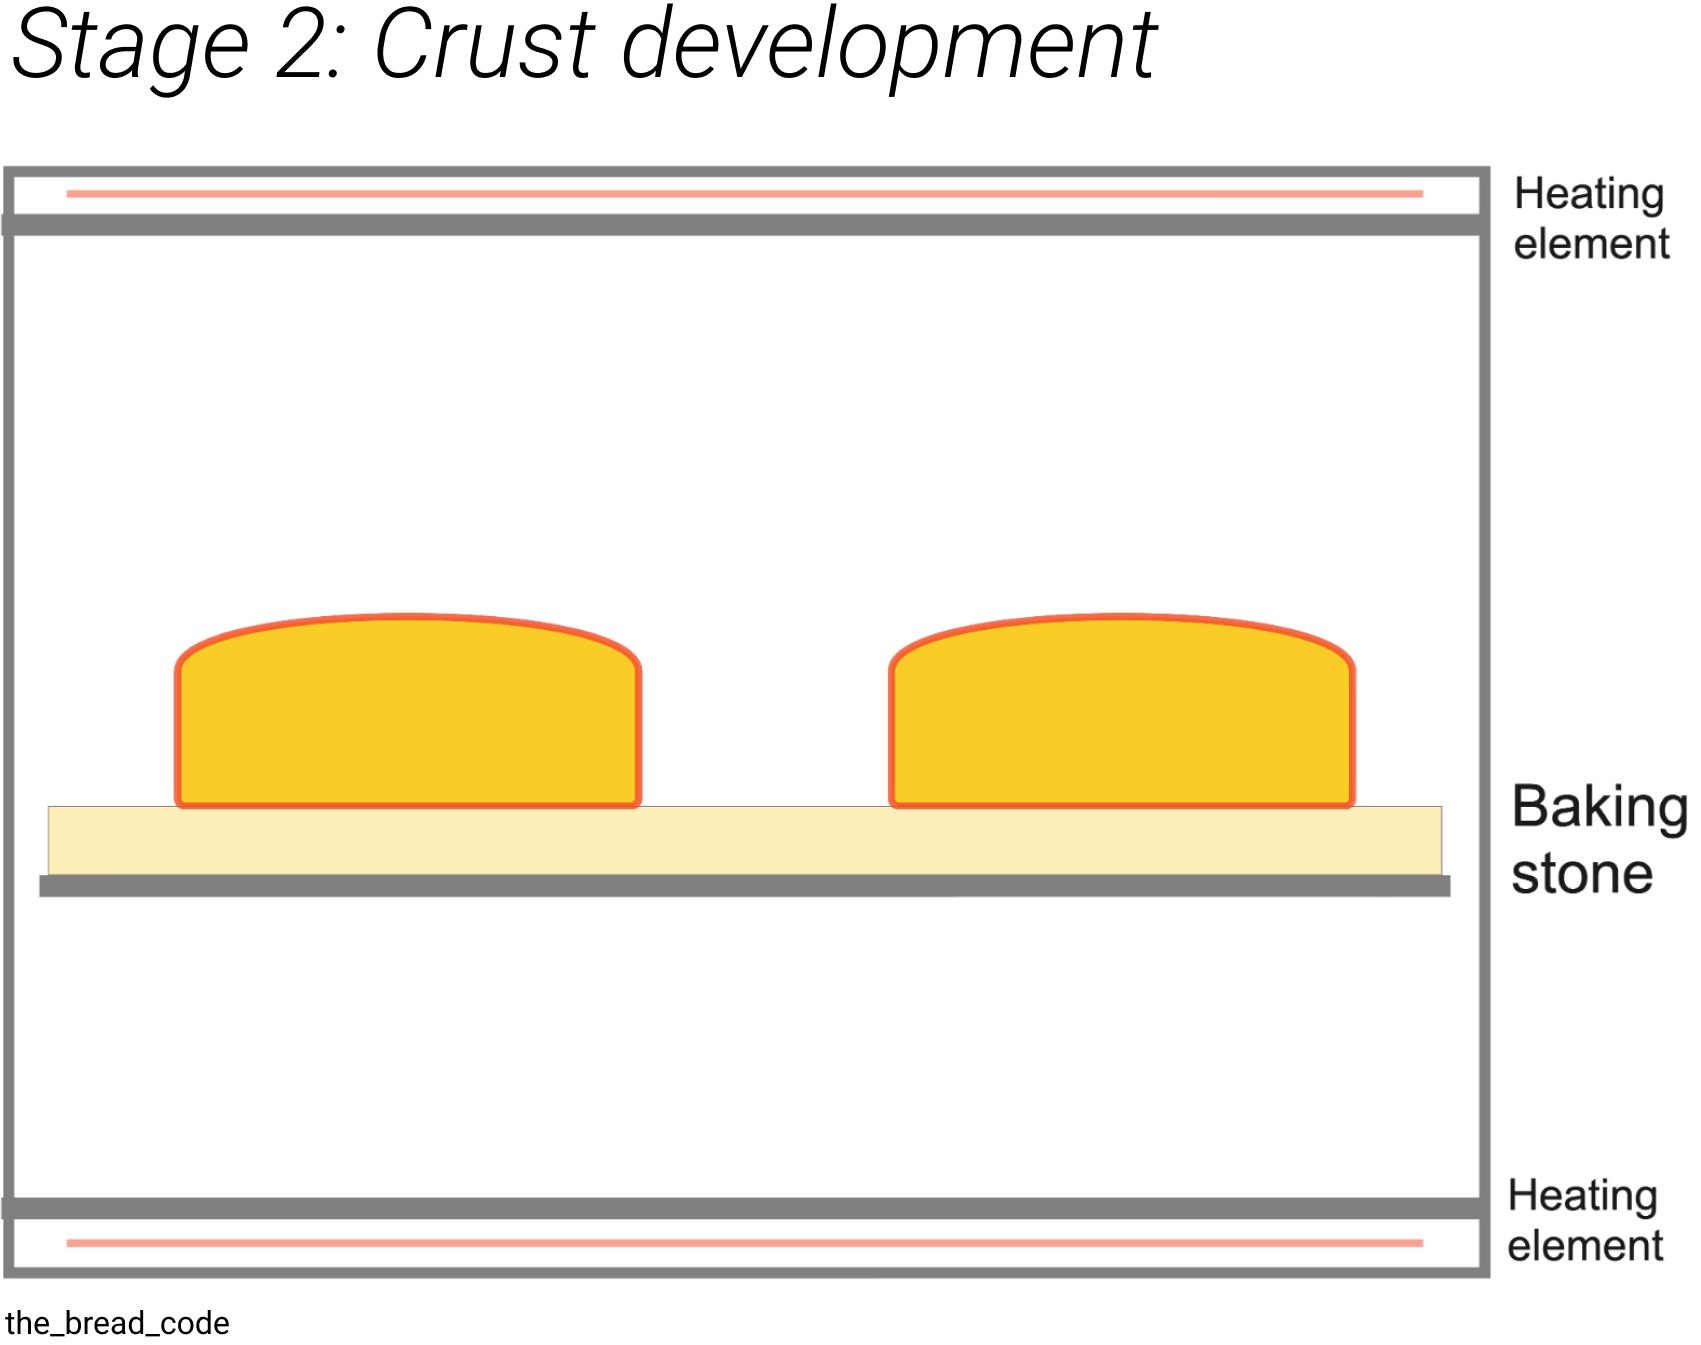 The crust building process